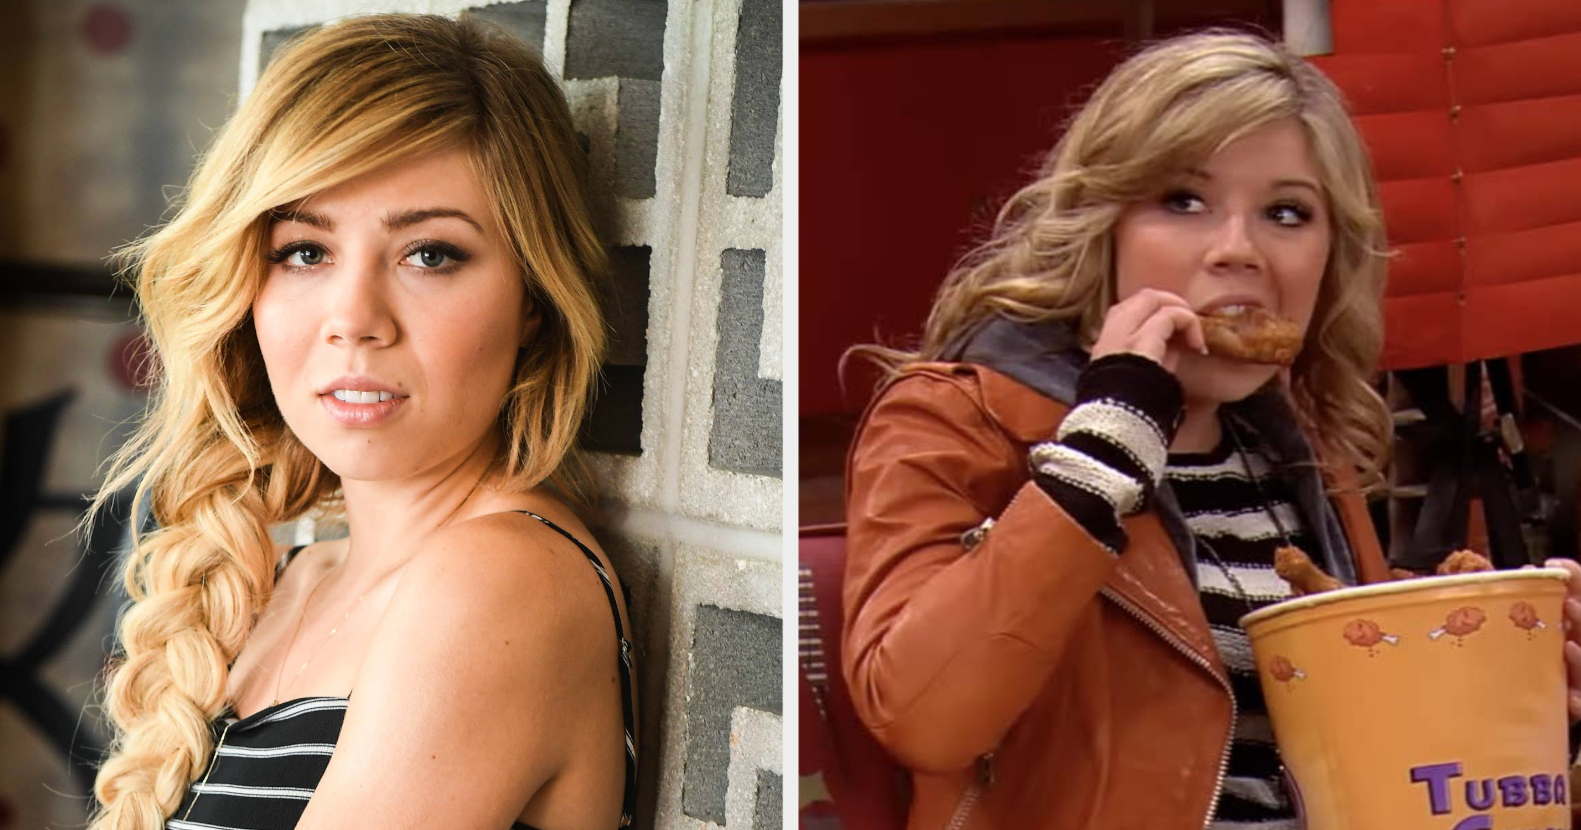 Hot Lesbian Jennette Mccurdy Nude - Jennette McCurdy Struggled With Food-Obsessed â€œiCarlyâ€ Character, Eating  Disorders